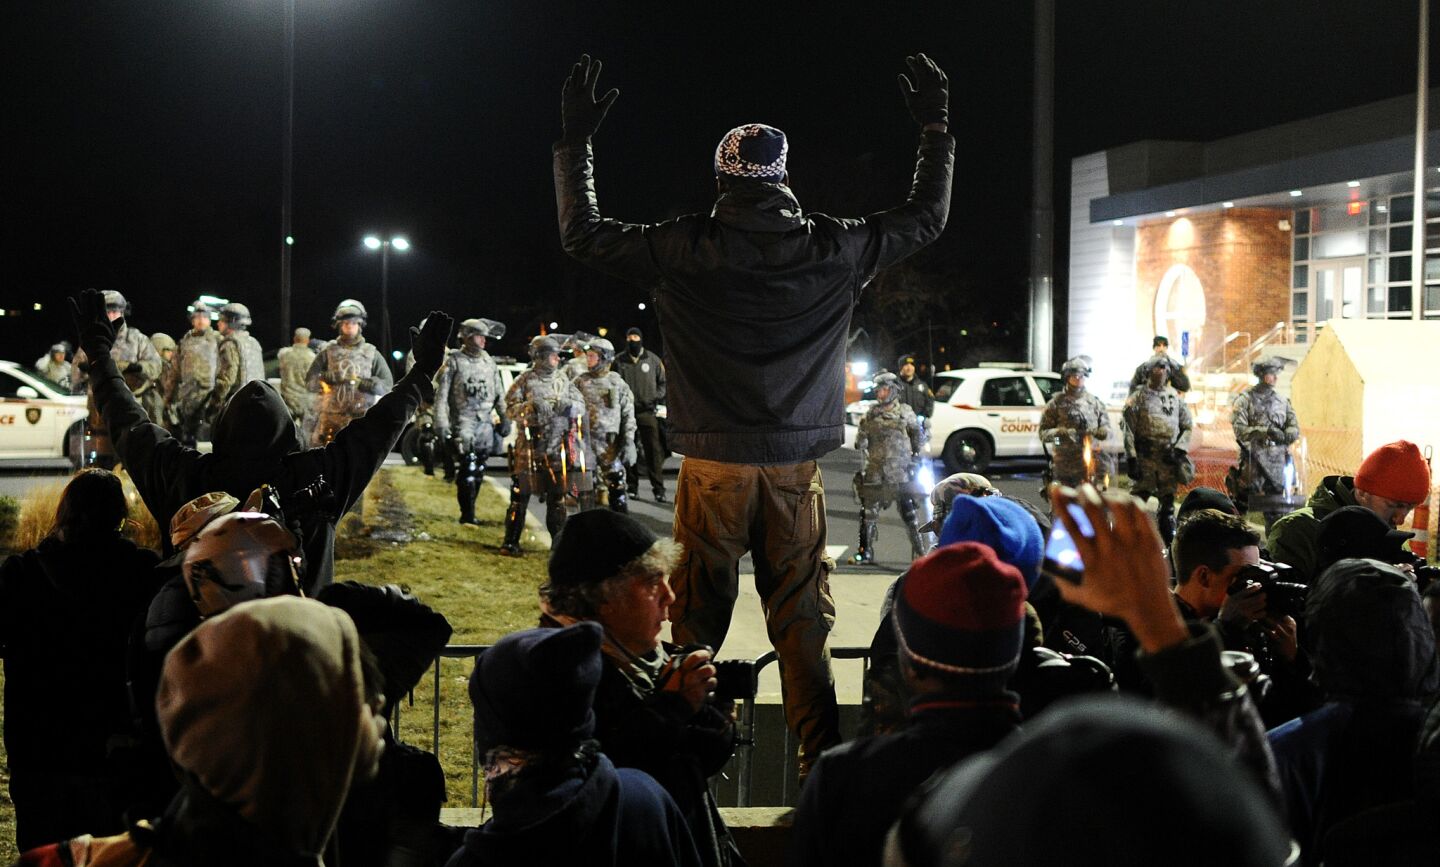 Protesters raise their hands outside the Ferguson police station on Nov. 25.